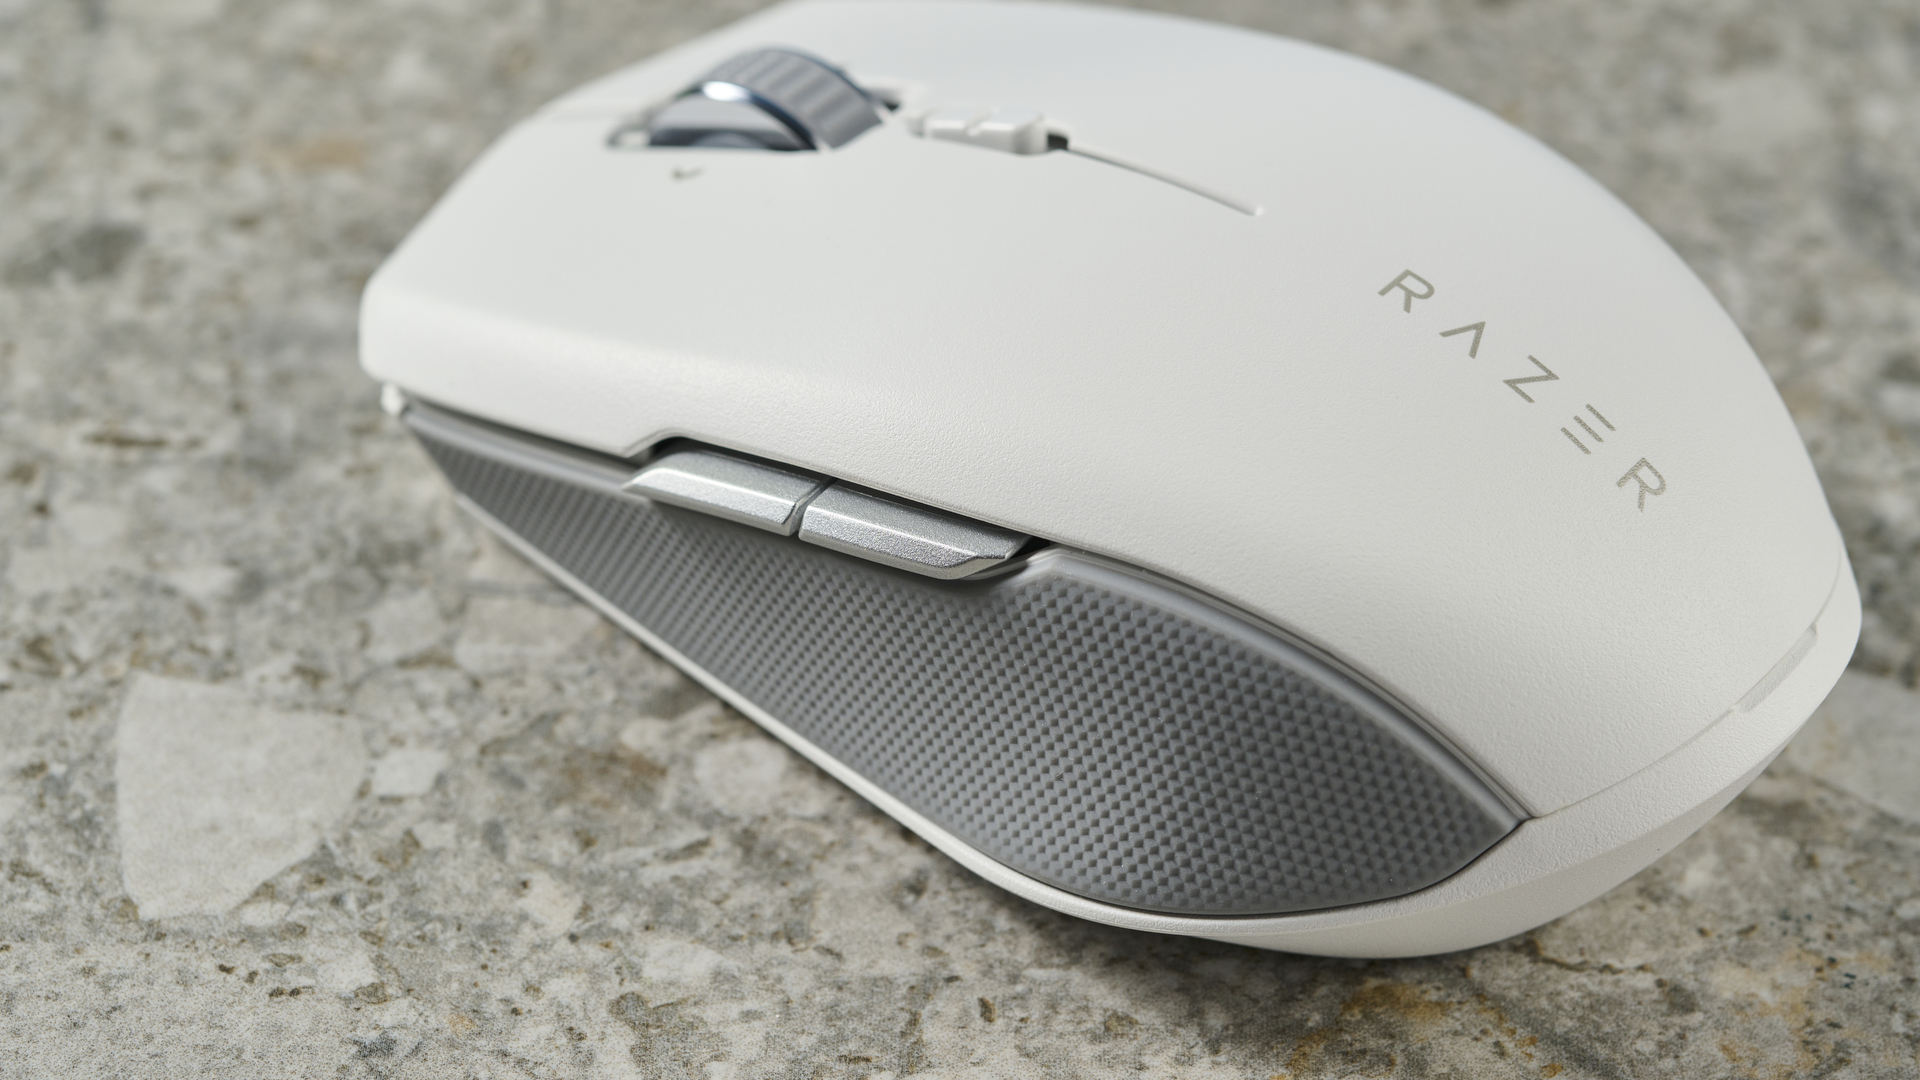 A close-up of the side buttons on a white Razer Pro Click Mini wireless mouse